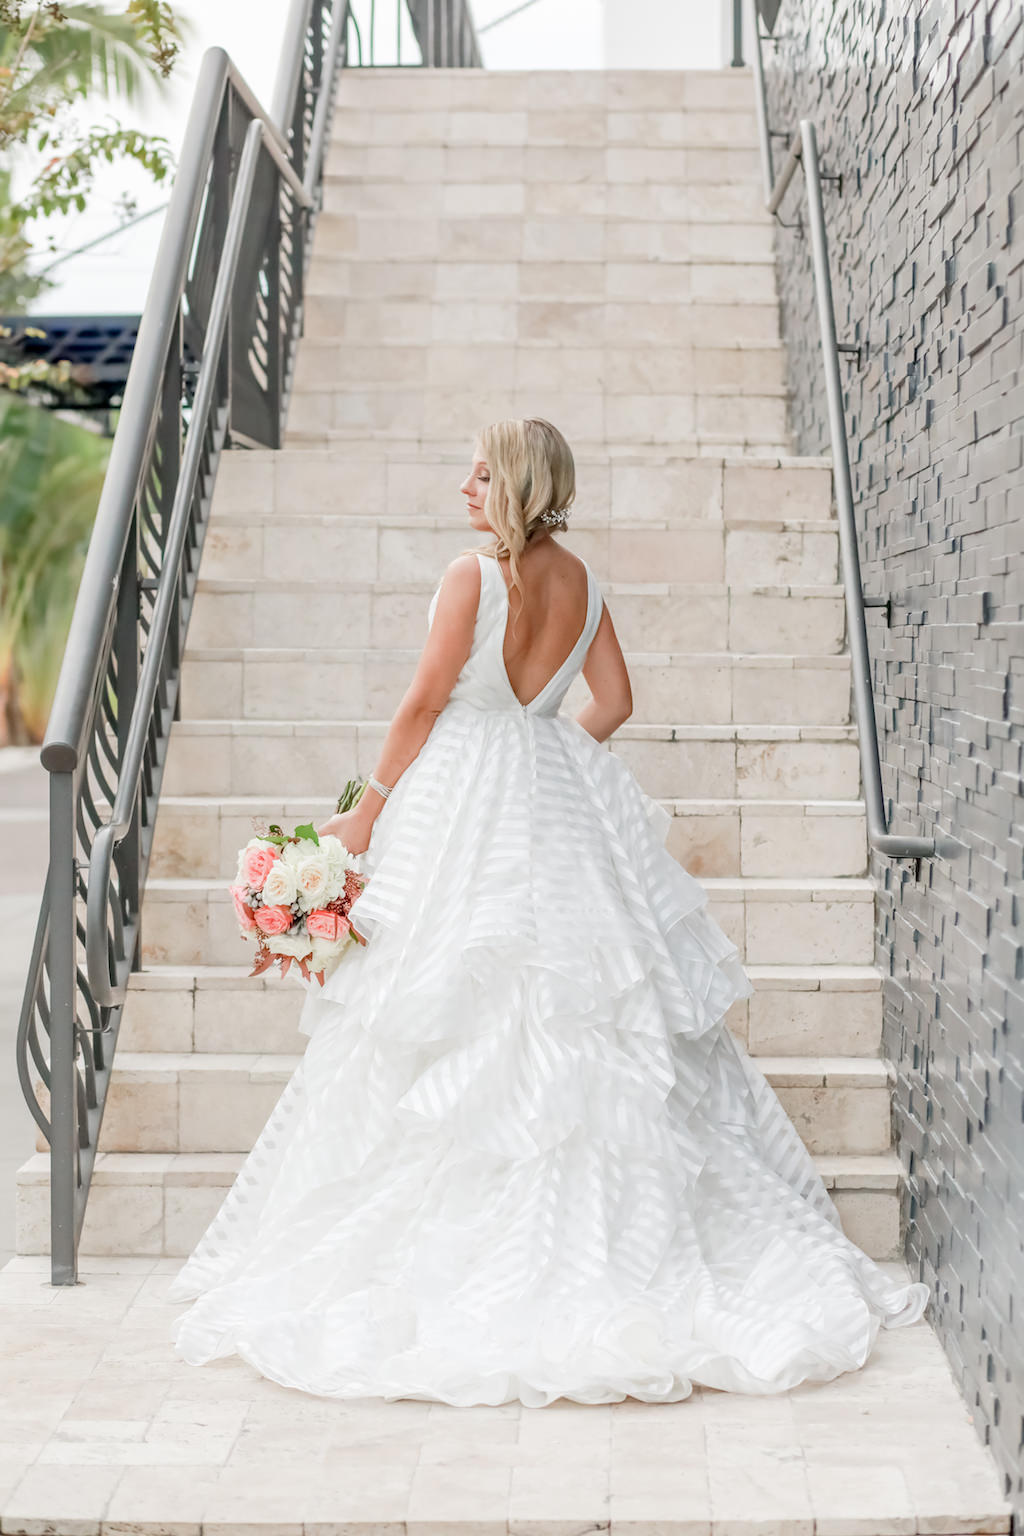 Florida Bride Wedding Portrait in Organza Striped with Horsehair Edging, Low Back with Thick Straps Morliee Ballgown Wedding Dress | Tampa Bay Wedding Photographer Lifelong Photography Studios | Dress Shop Truly Forever Bridal